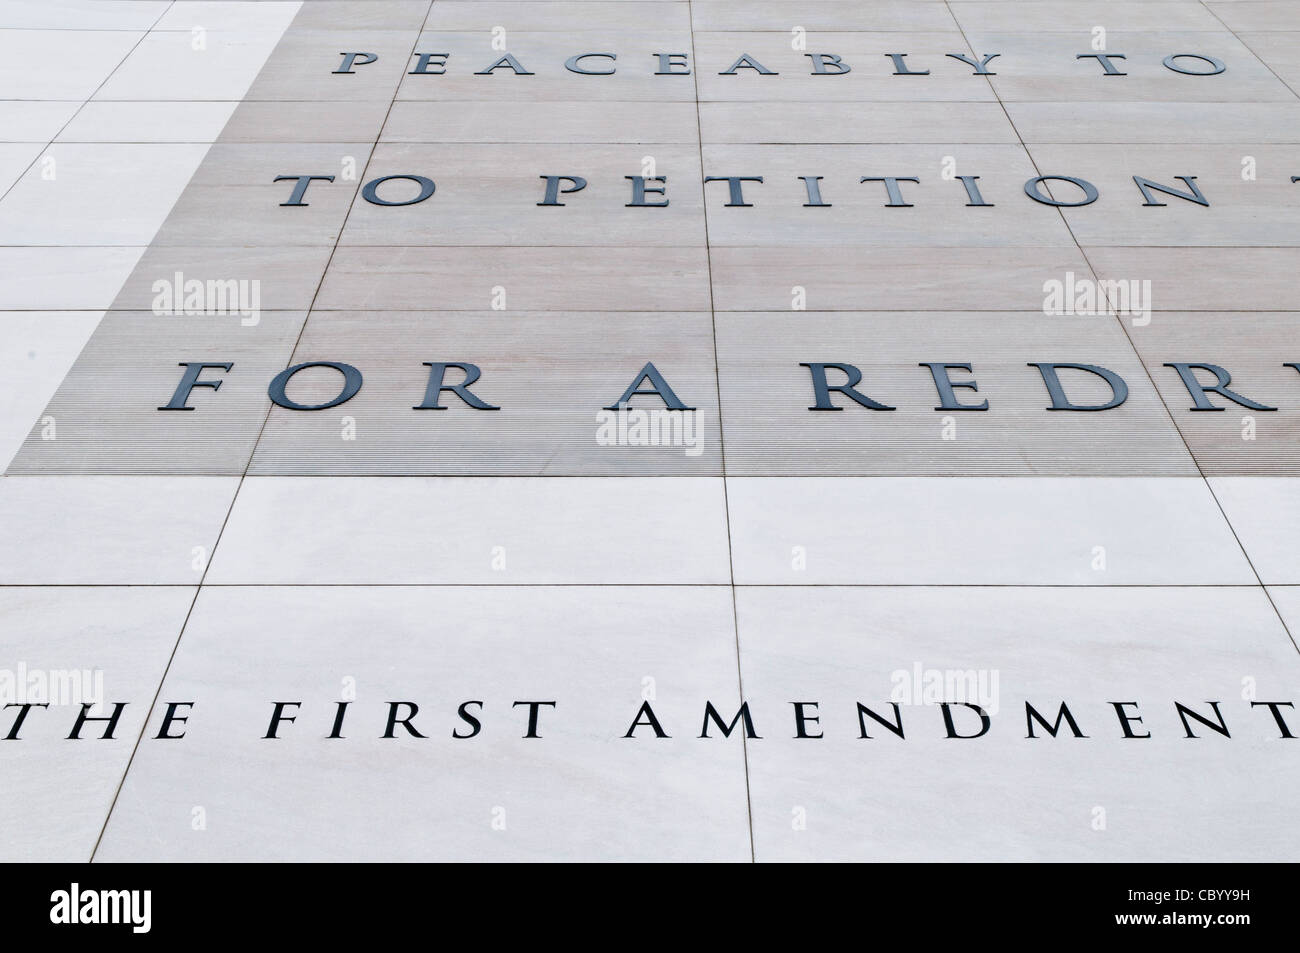 WASHINGTON DC, USA - The exterior of the Newseum in Washington DC features a large extract carved in stone of the First Amendment to the Constitution that provides for freedom of the Press. The Newseum is a 7-story, privately funded museum dedicated to journalism and news. It opened at its current location on Pennsylvania Avenue in April 2008. Stock Photo